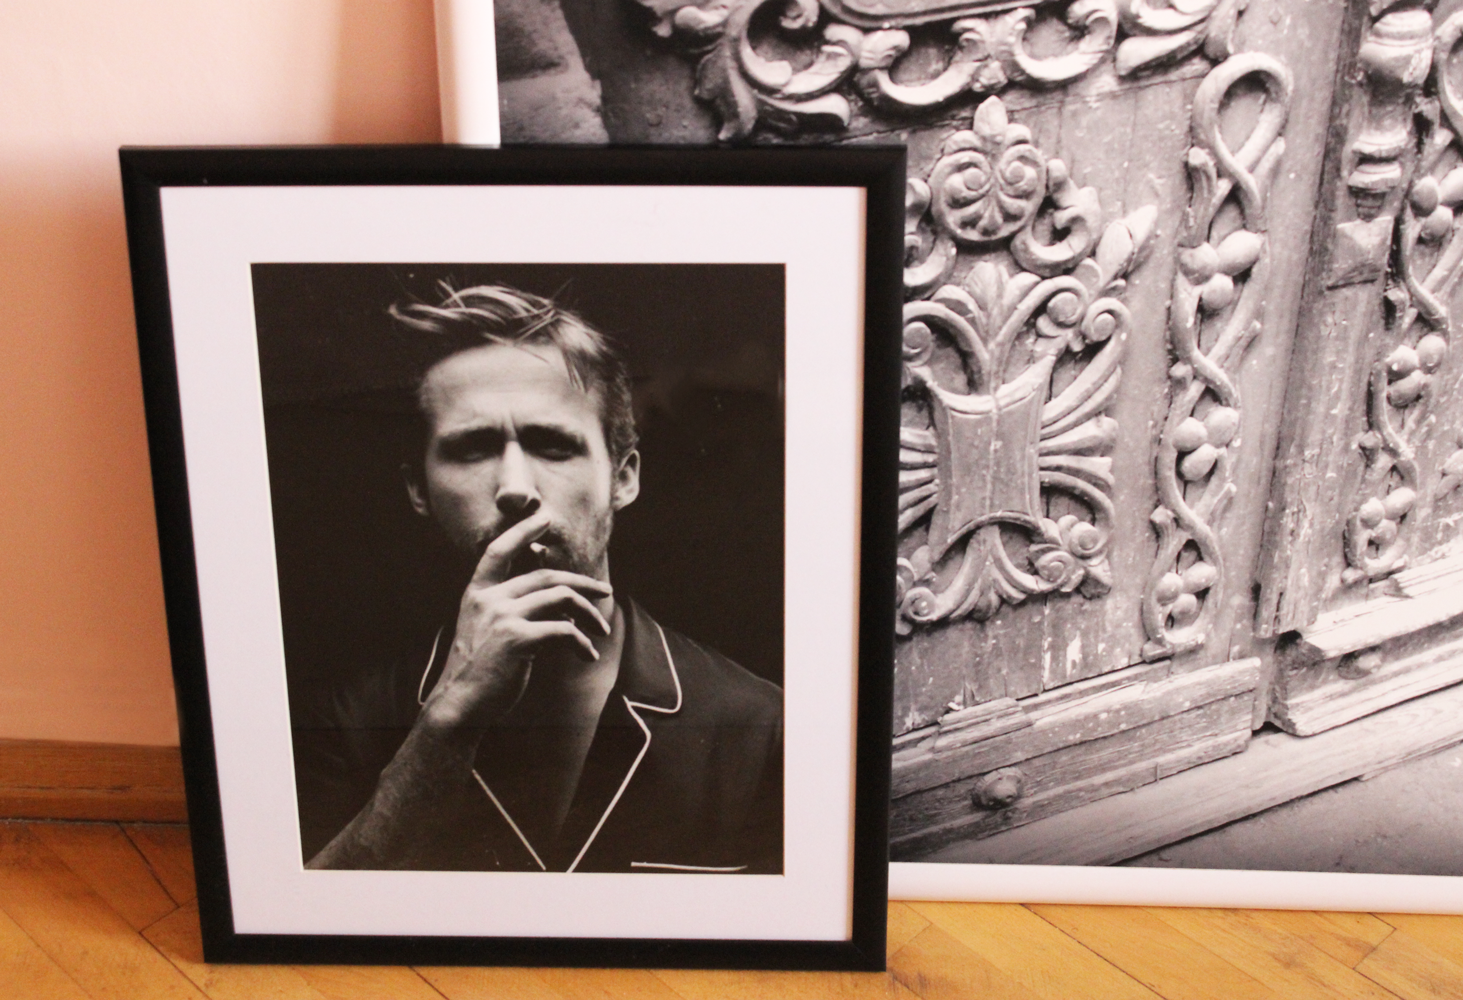 About Displaying Art, Layering Photos And Ryan Gosling In My Bedroom